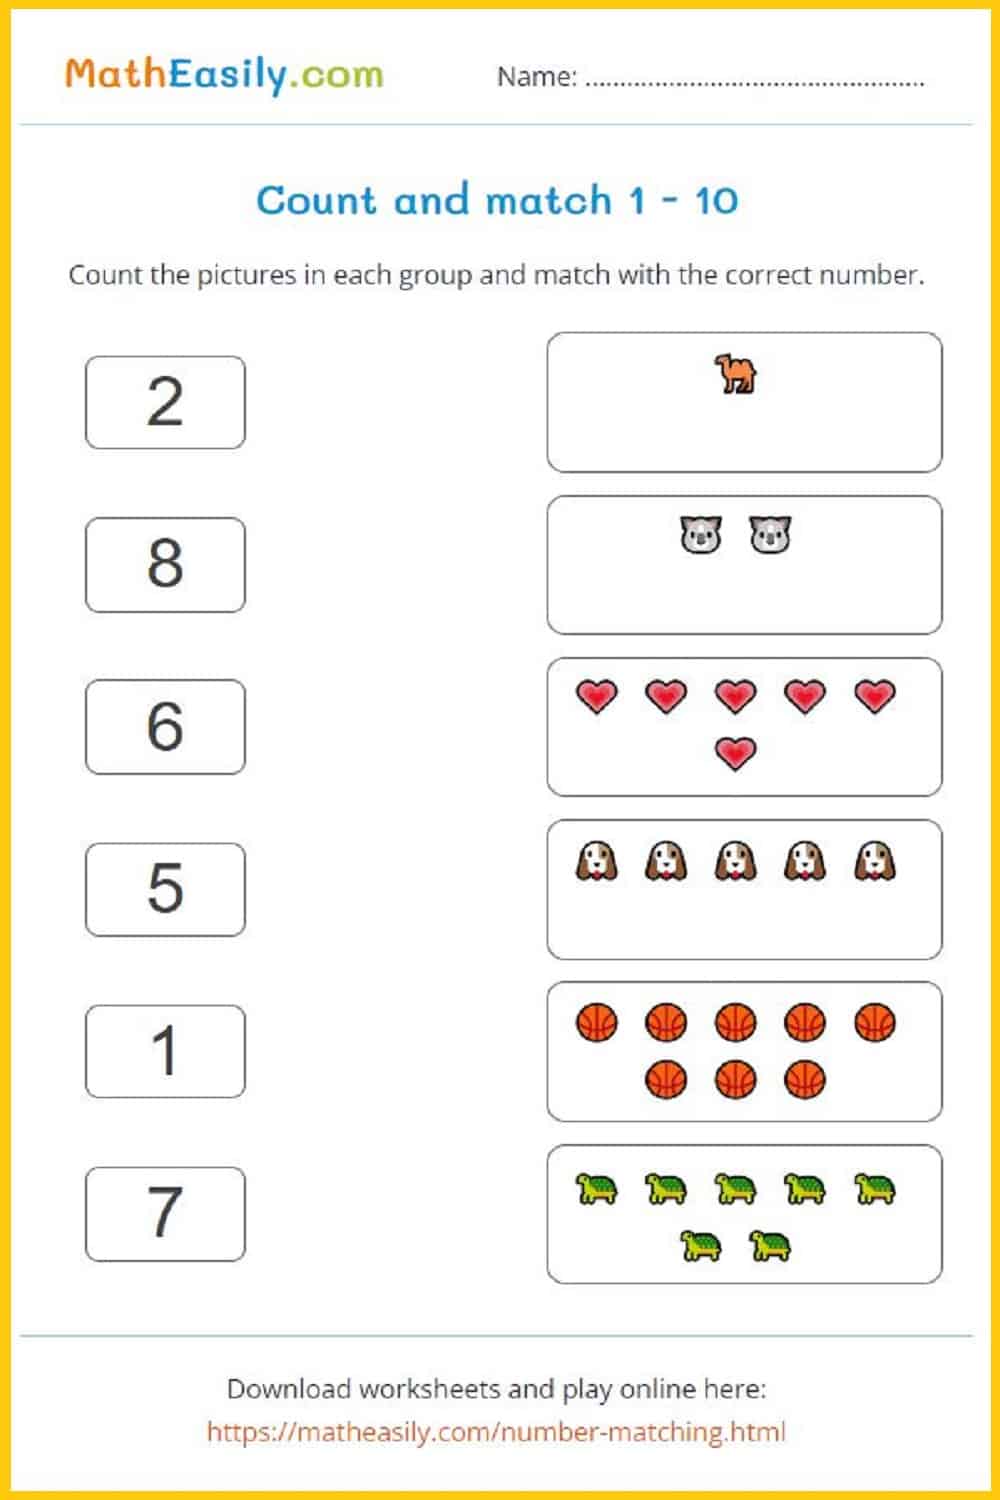 Count and match worksheets 1-10. match the numbers 1 to 10. matching numbers worksheets 1-10. Match numbers worksheet. count and match 1 to 10.  Matching numbers worksheet for preschool. matching numbers 1 10 worksheets. matching numbers games. counting and matching numbers.   matching numbers with objects 1-10 worksheets for preschool pdf. free number matching printables.